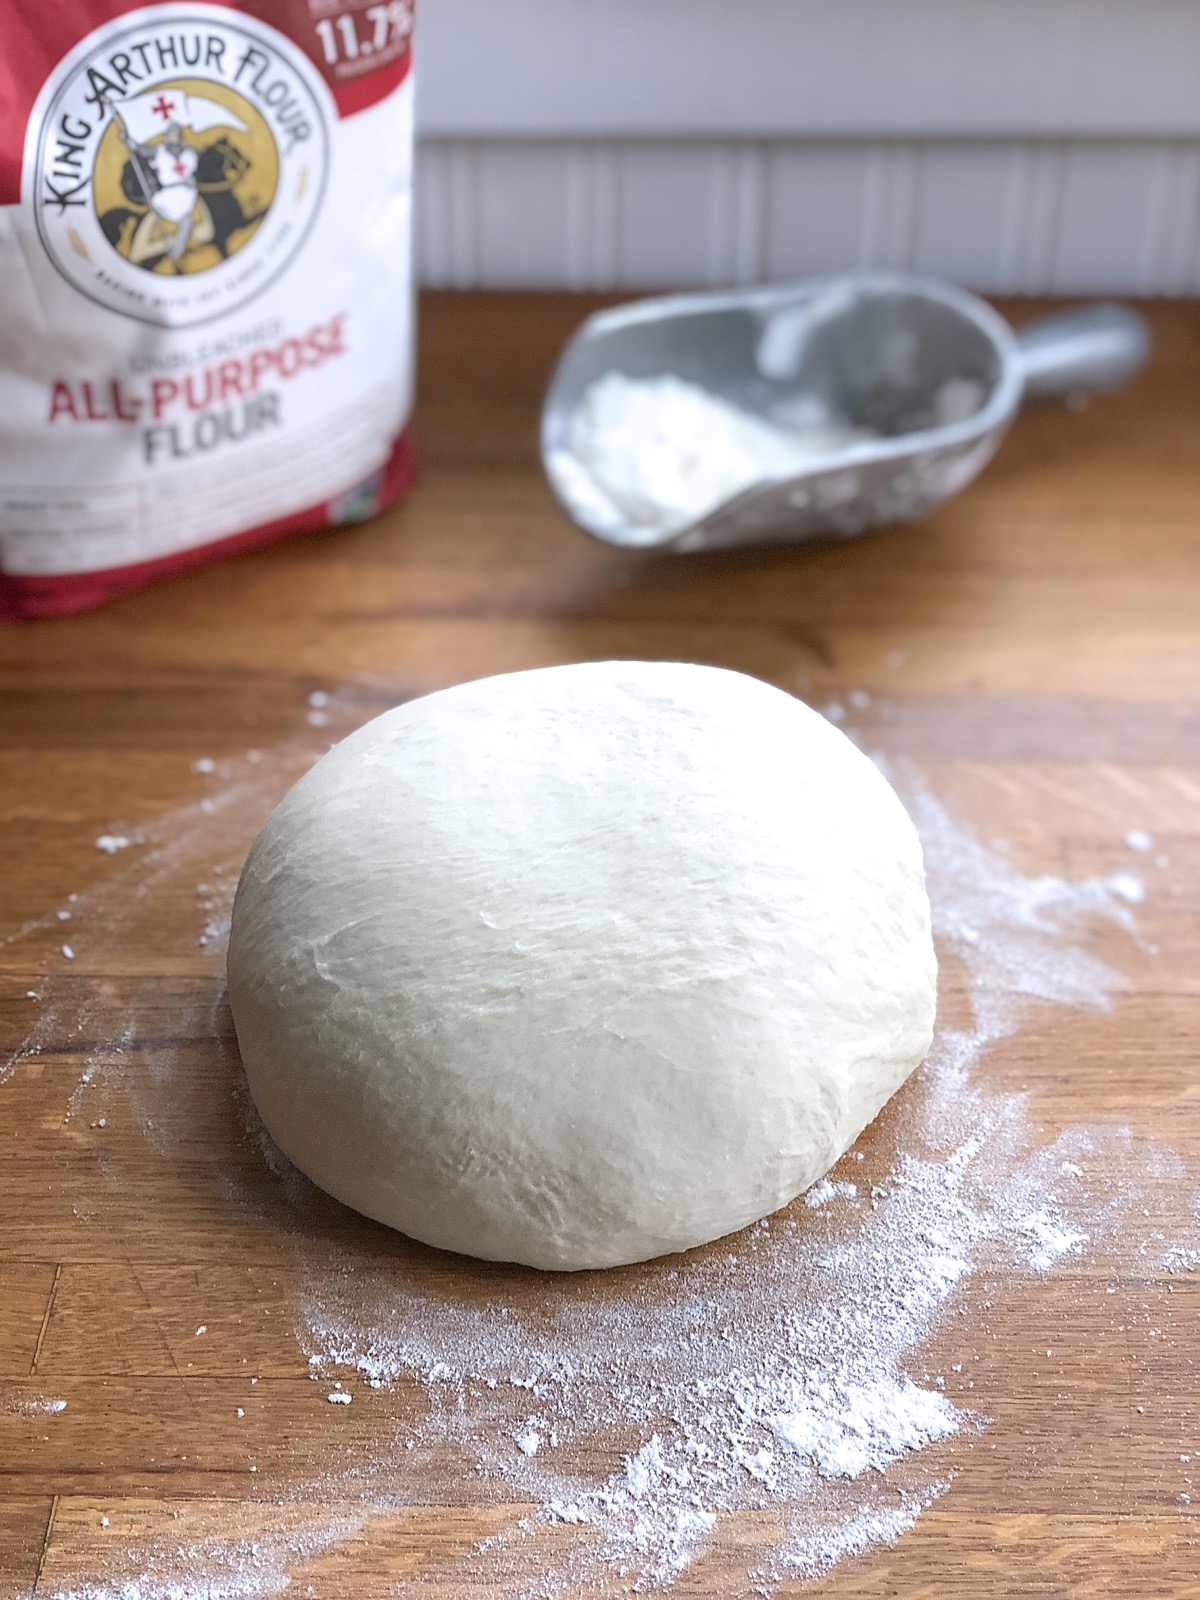 A smooth ball of fully kneaded dough on a floured tabletop.